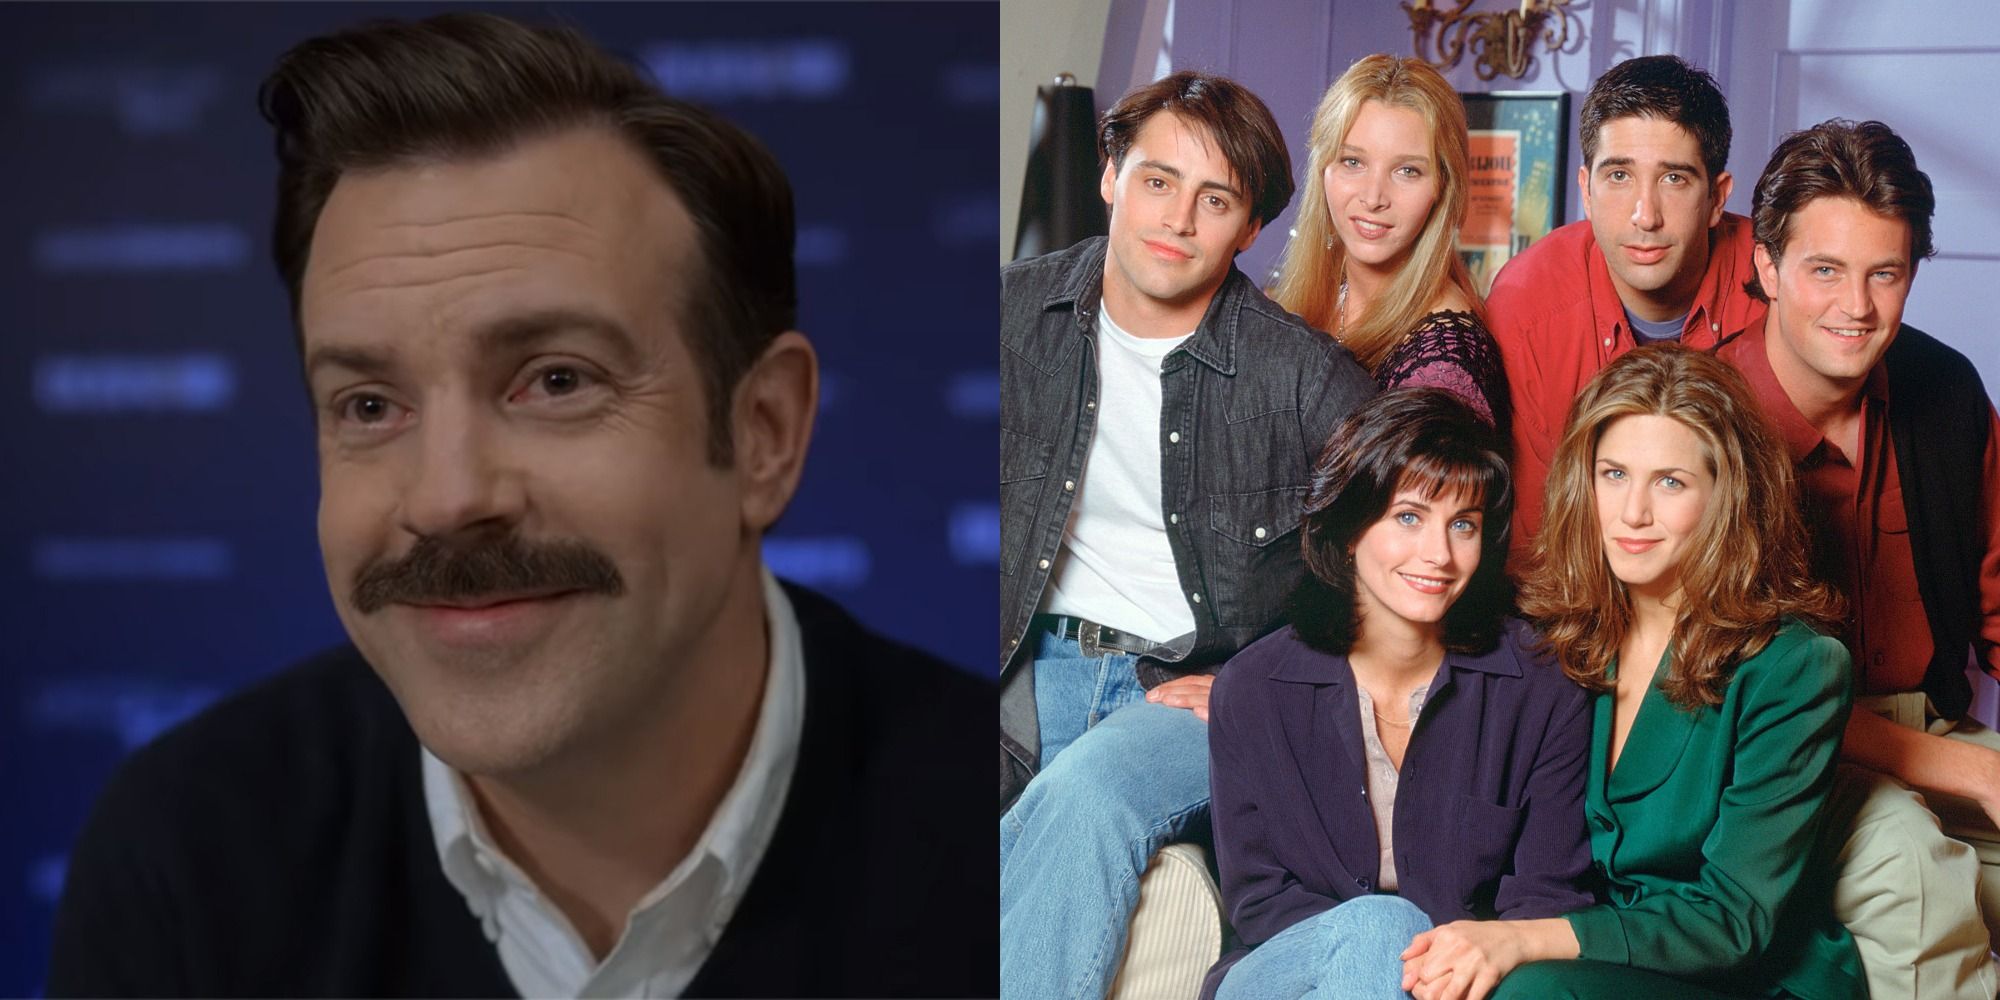 Split image of Jason Sudeikis in Ted Lasso and the main cast of Friends